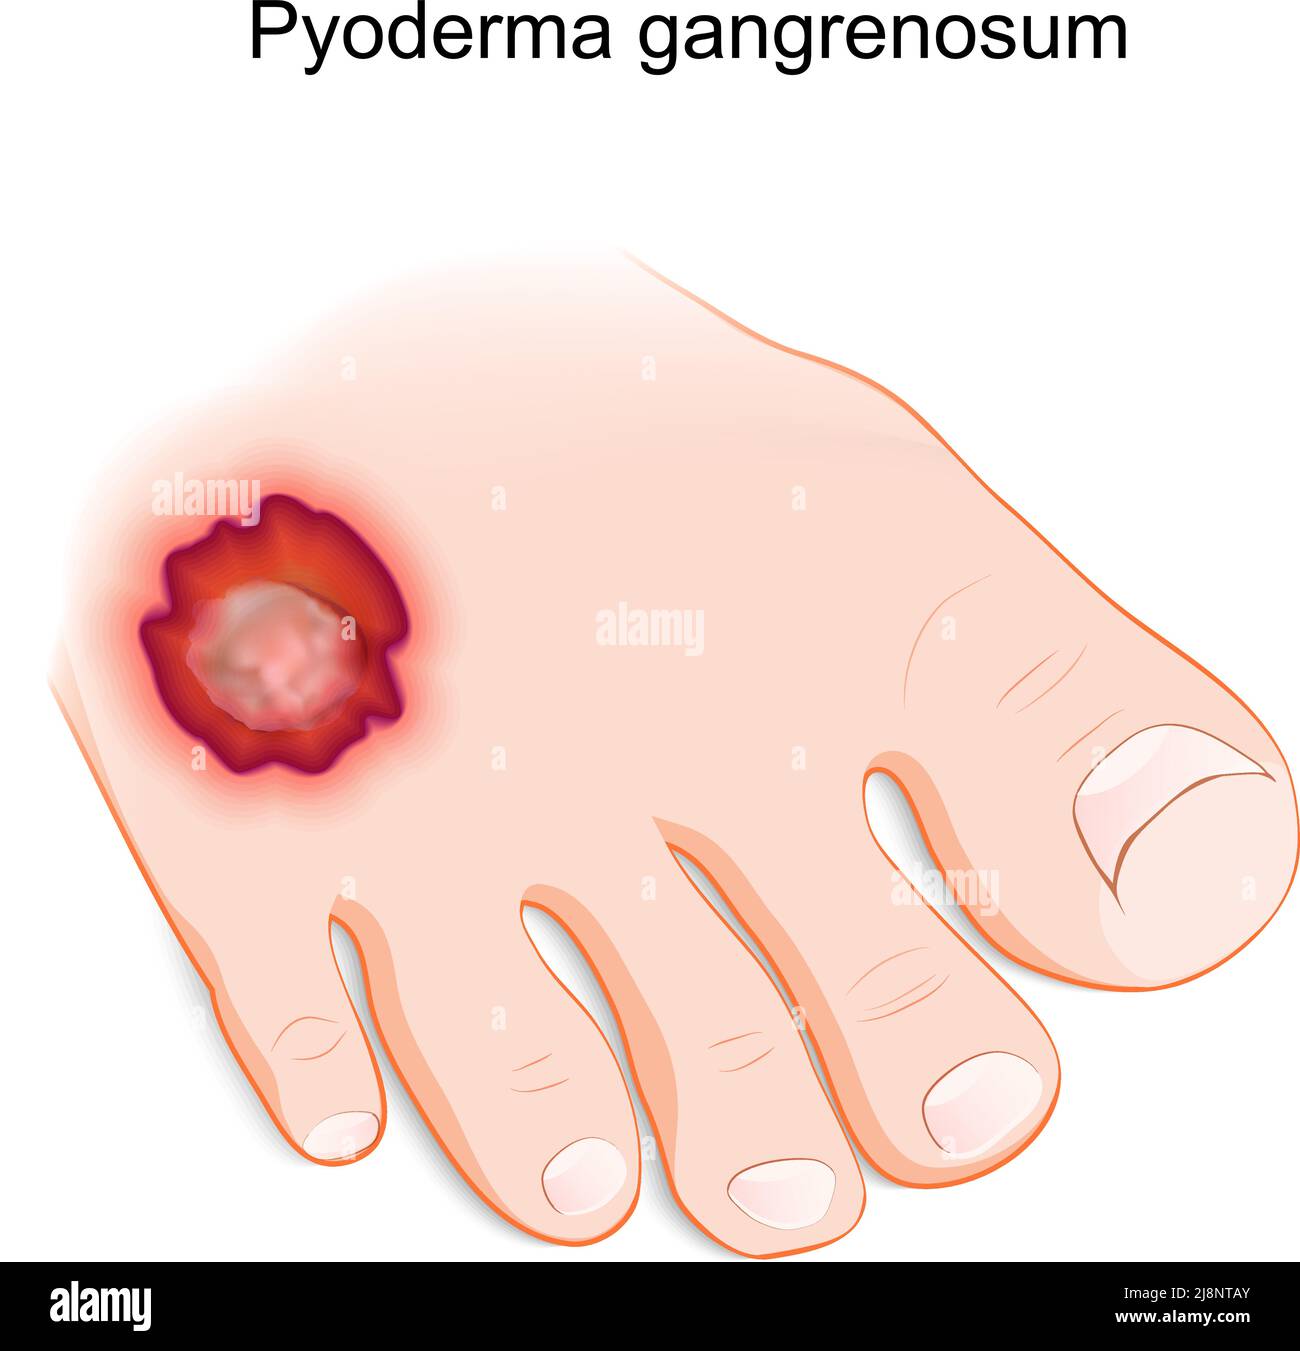 Pyoderma gangrenosum. inflammatory skin disease. Human's foot with a painful ulcer. vector illustration Stock Vector